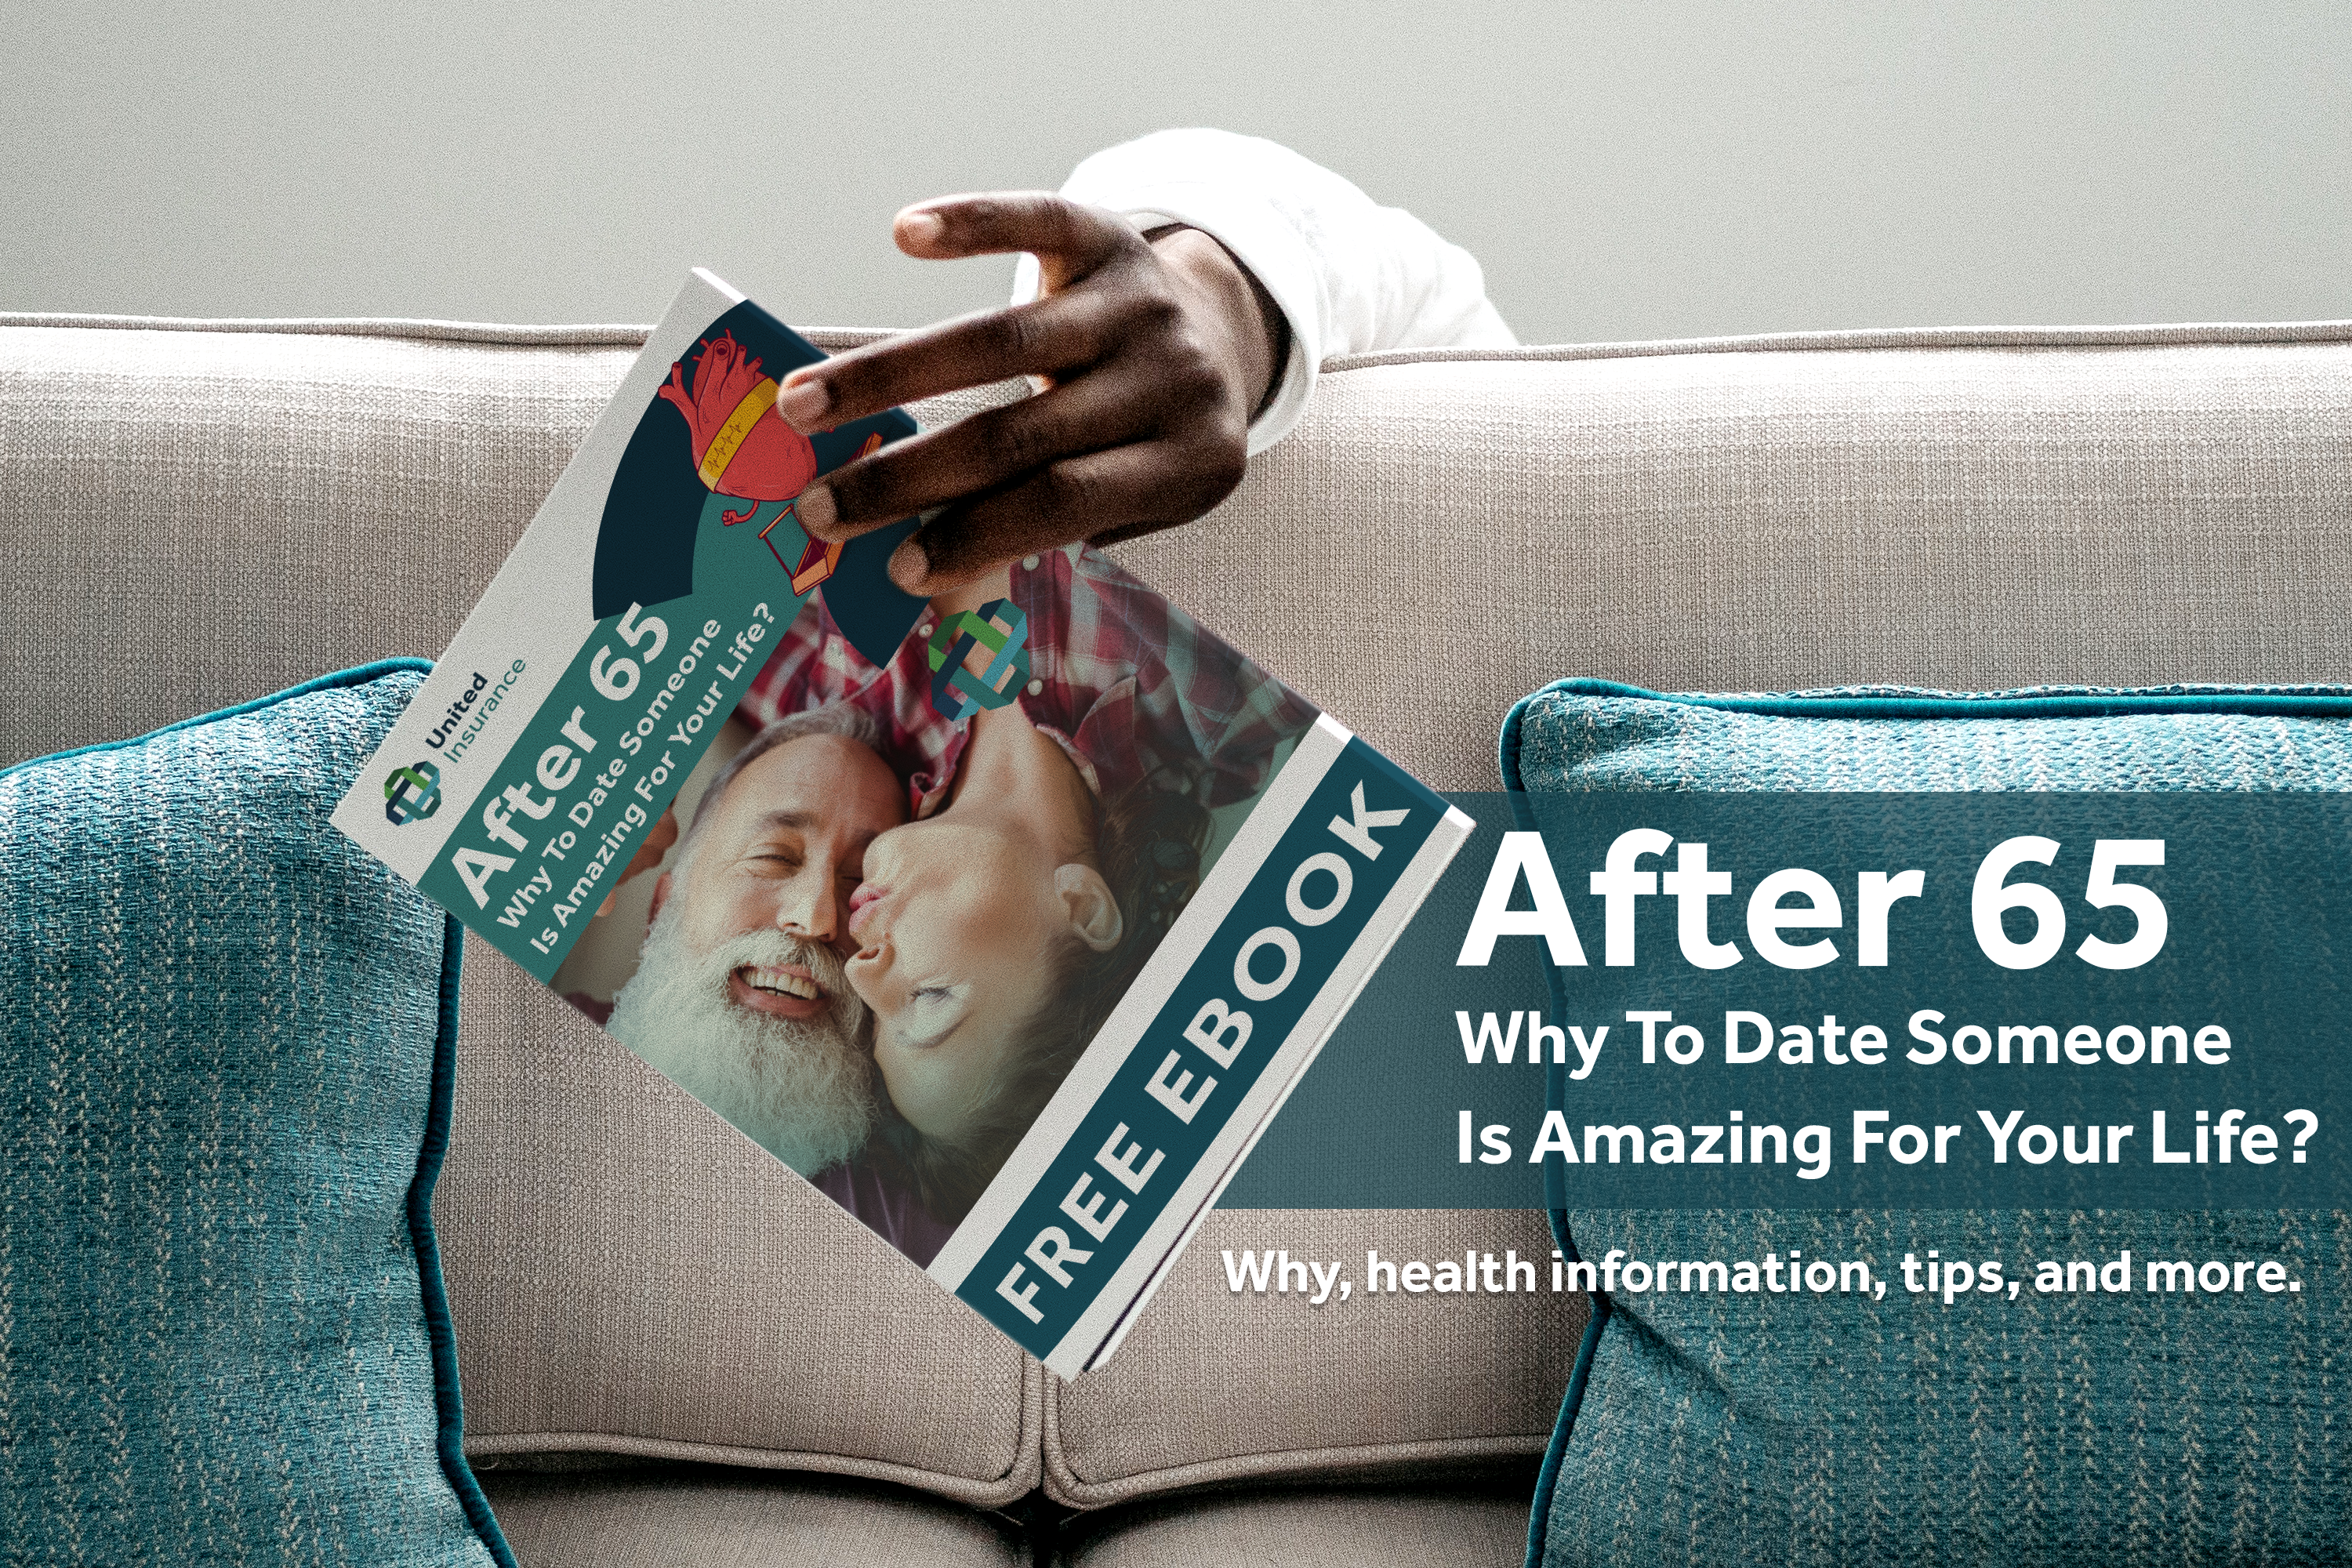 eBook: Why To Date Someone After 65 Is Amazing For Your Life?